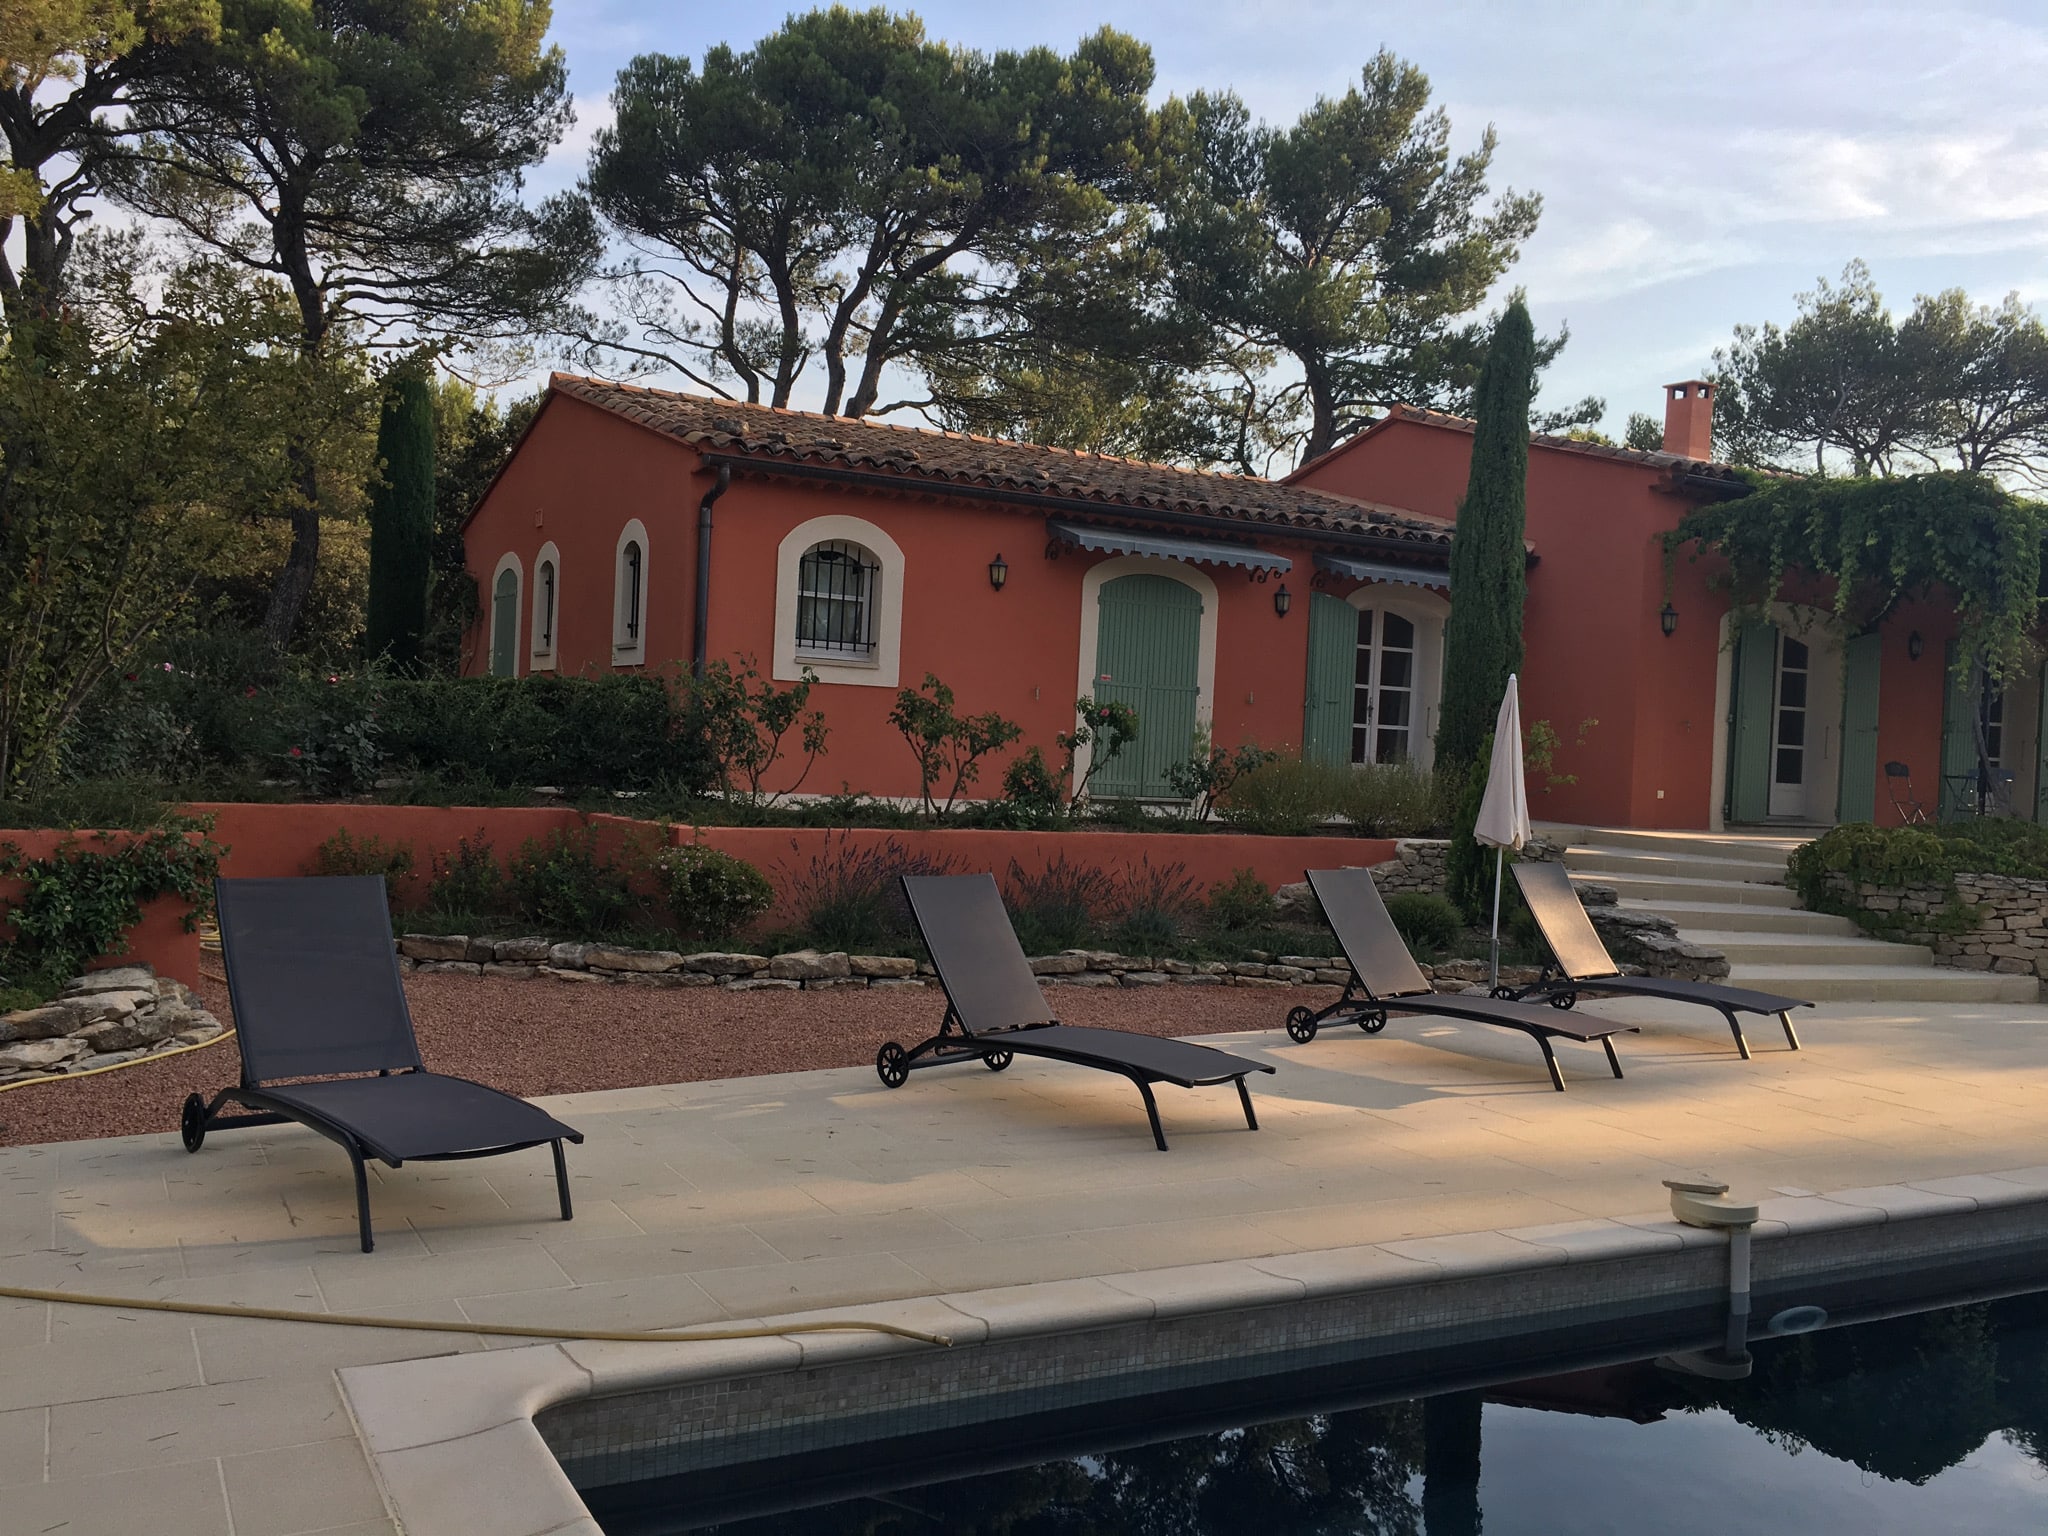 TOUR DE FRANCE IN ROUSSILLON, The Applewood Manor